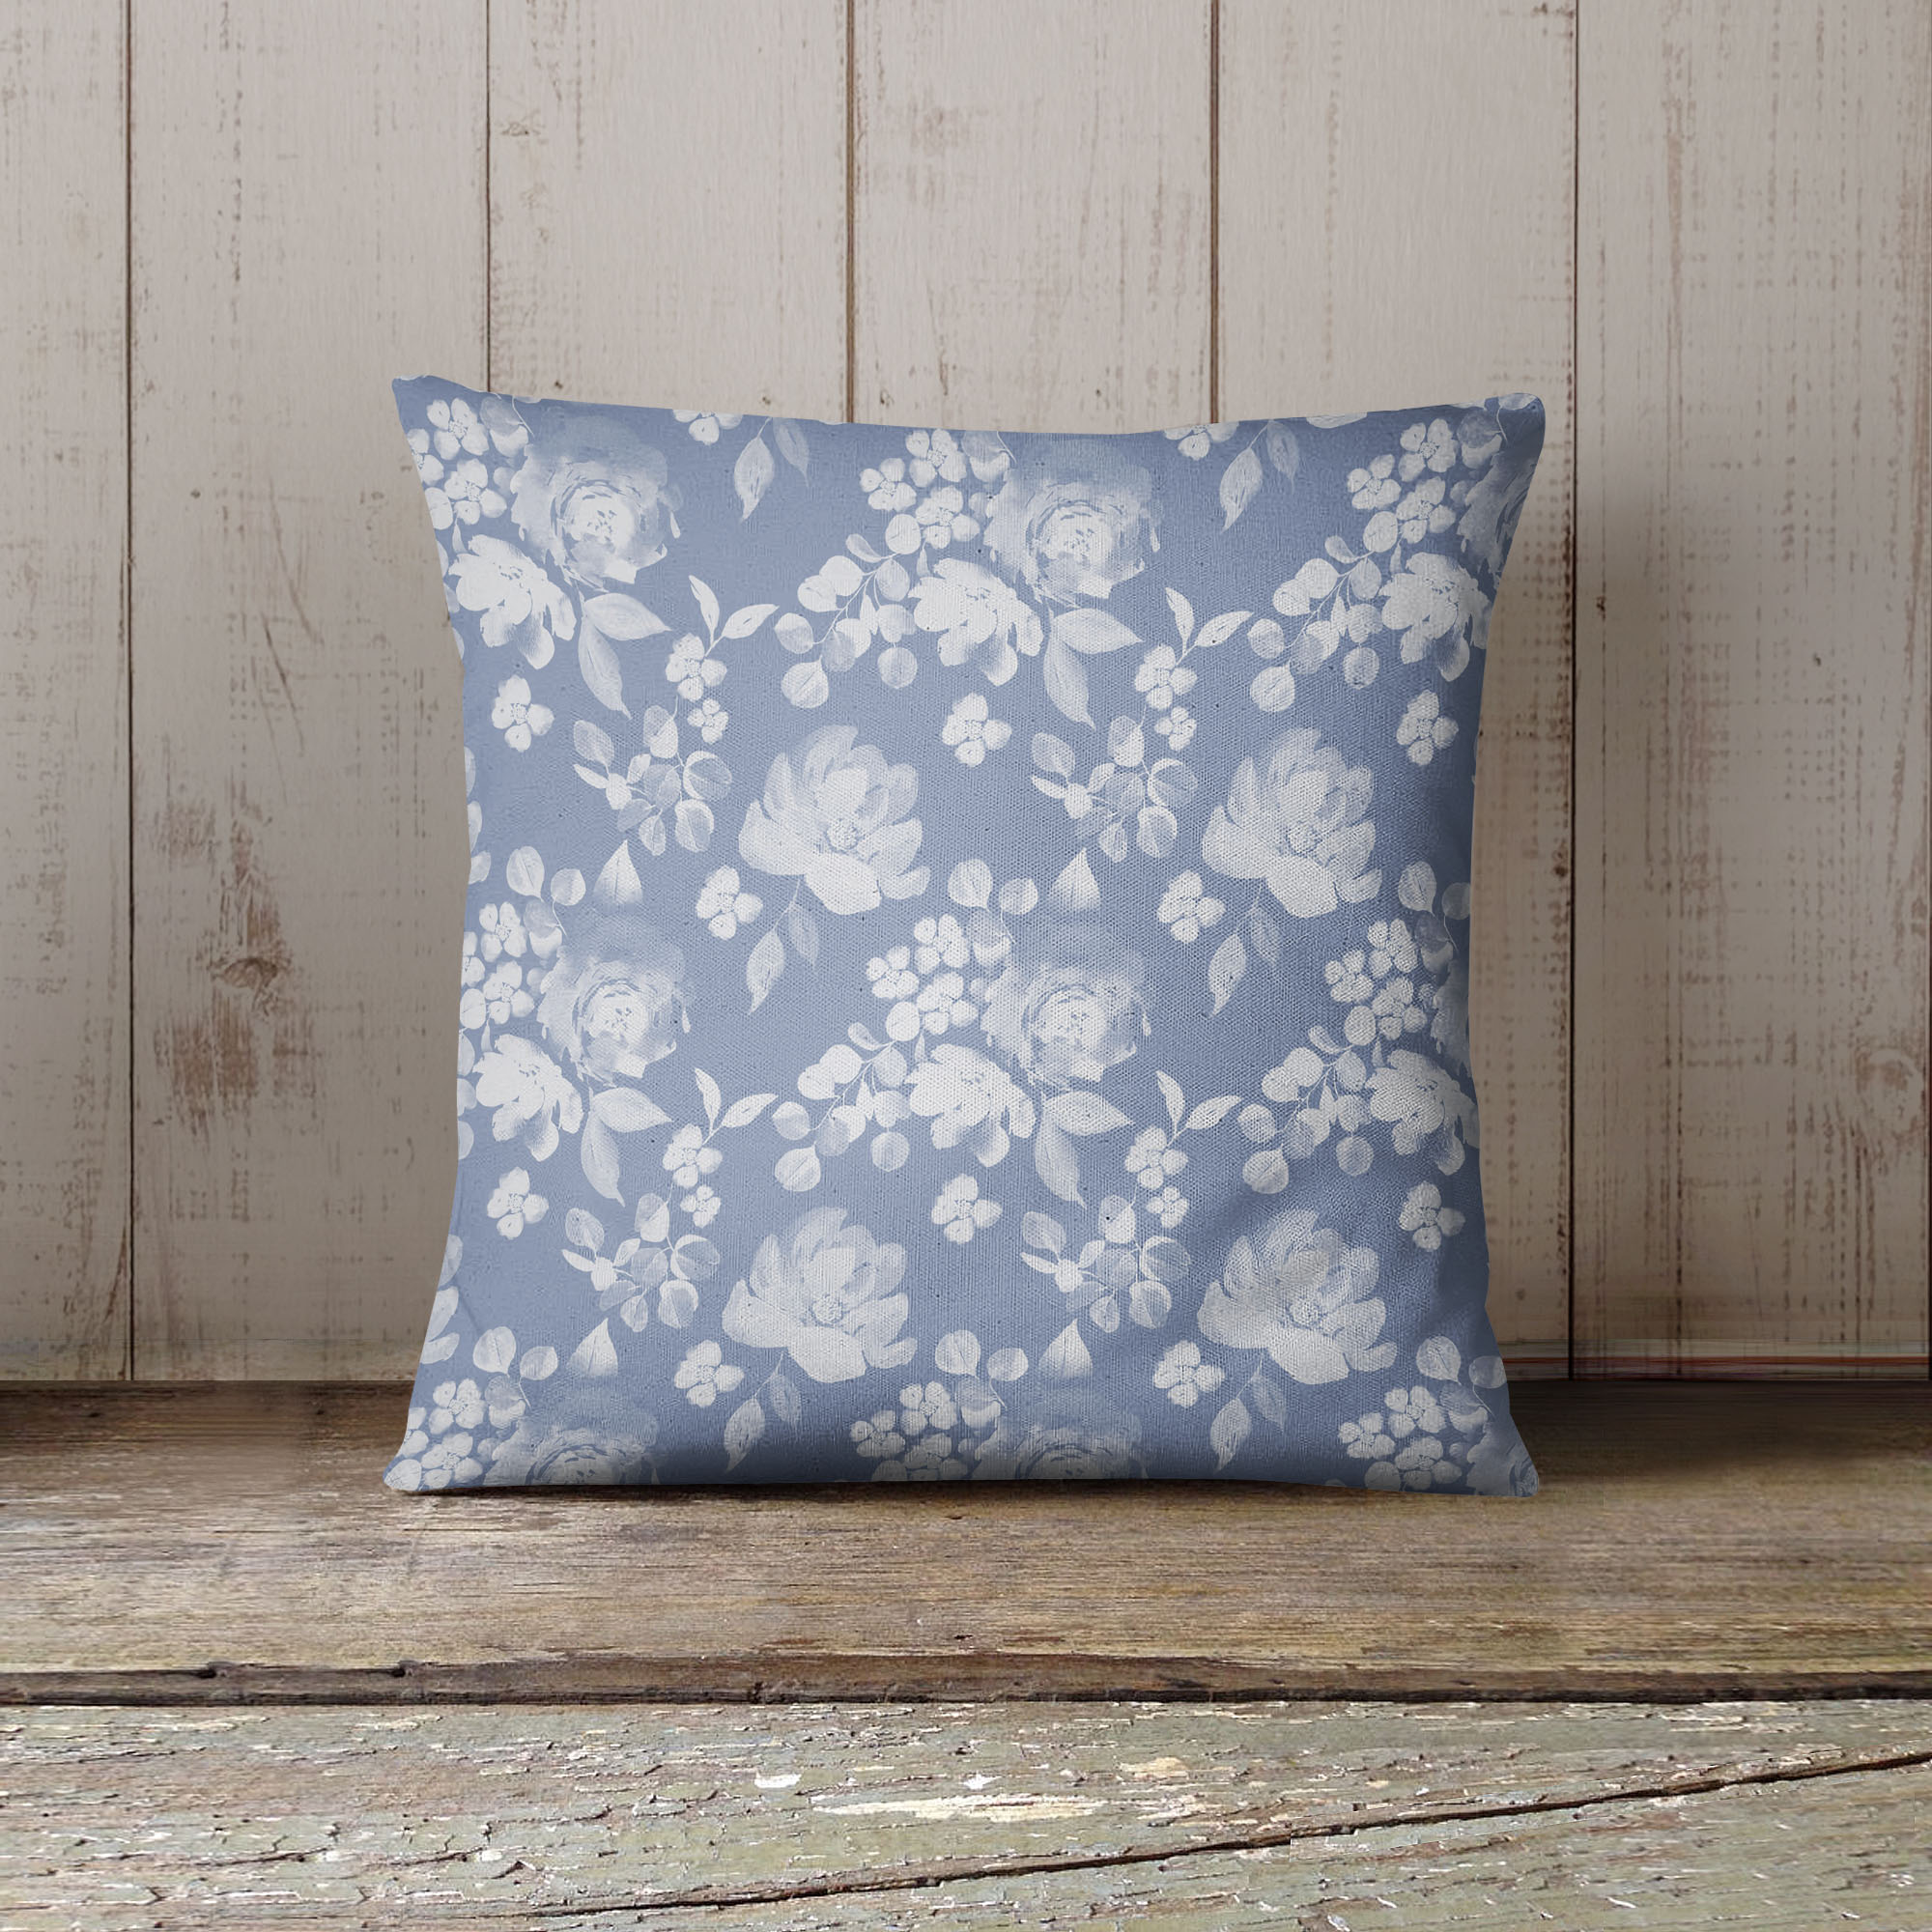 Cottage Blue Outdoor Pillow by Kavka Designs - image 2 of 5